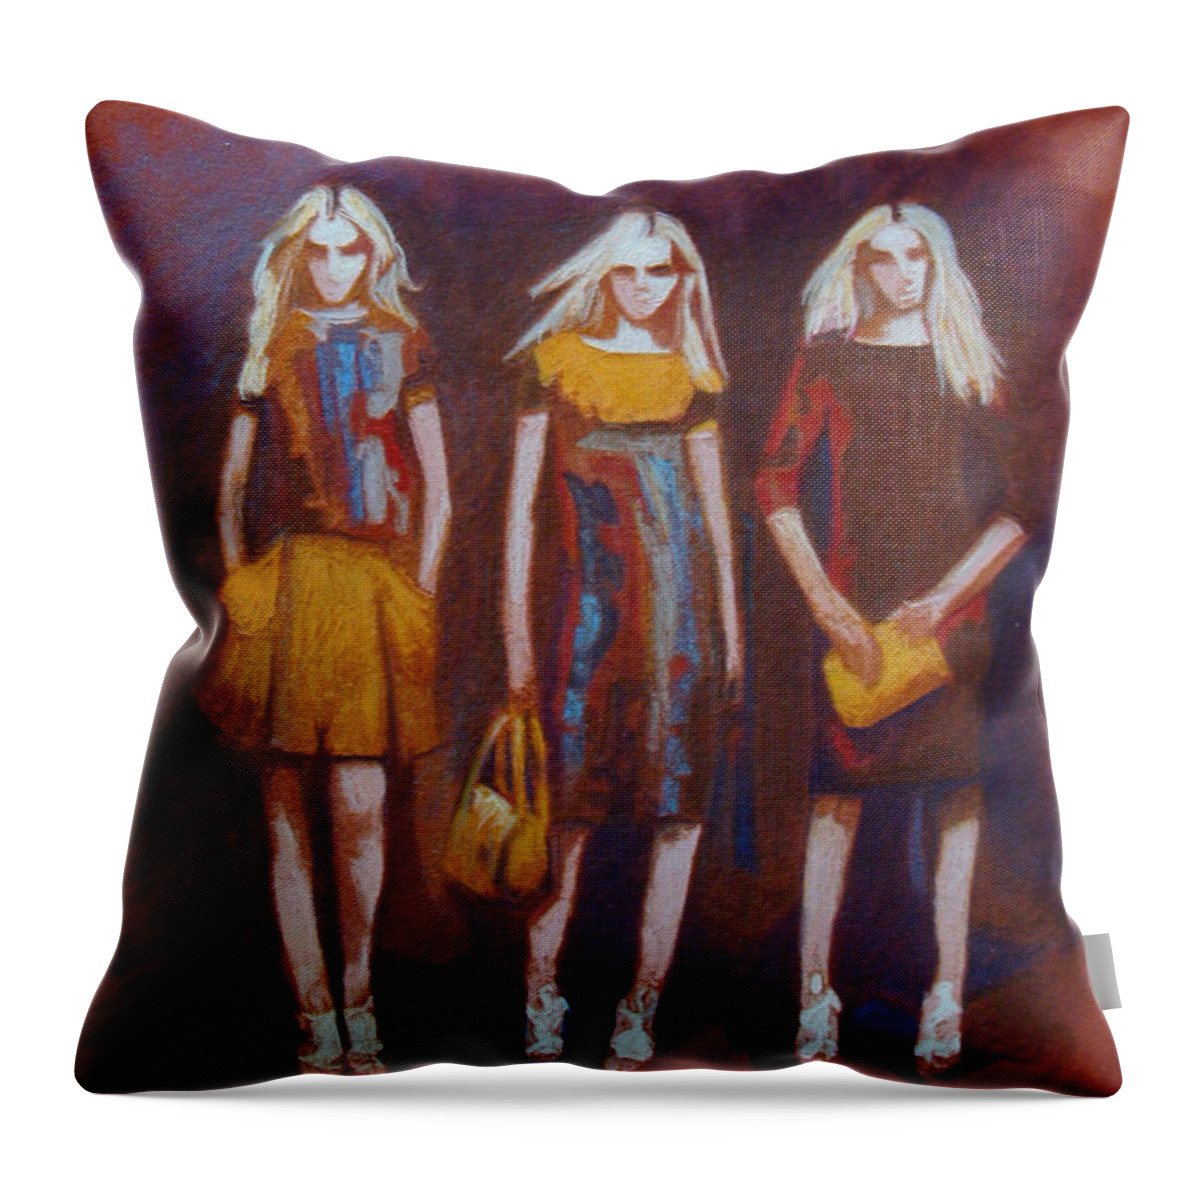 Fashion Throw Pillow featuring the painting On the Catwalk by Phyllis Howard